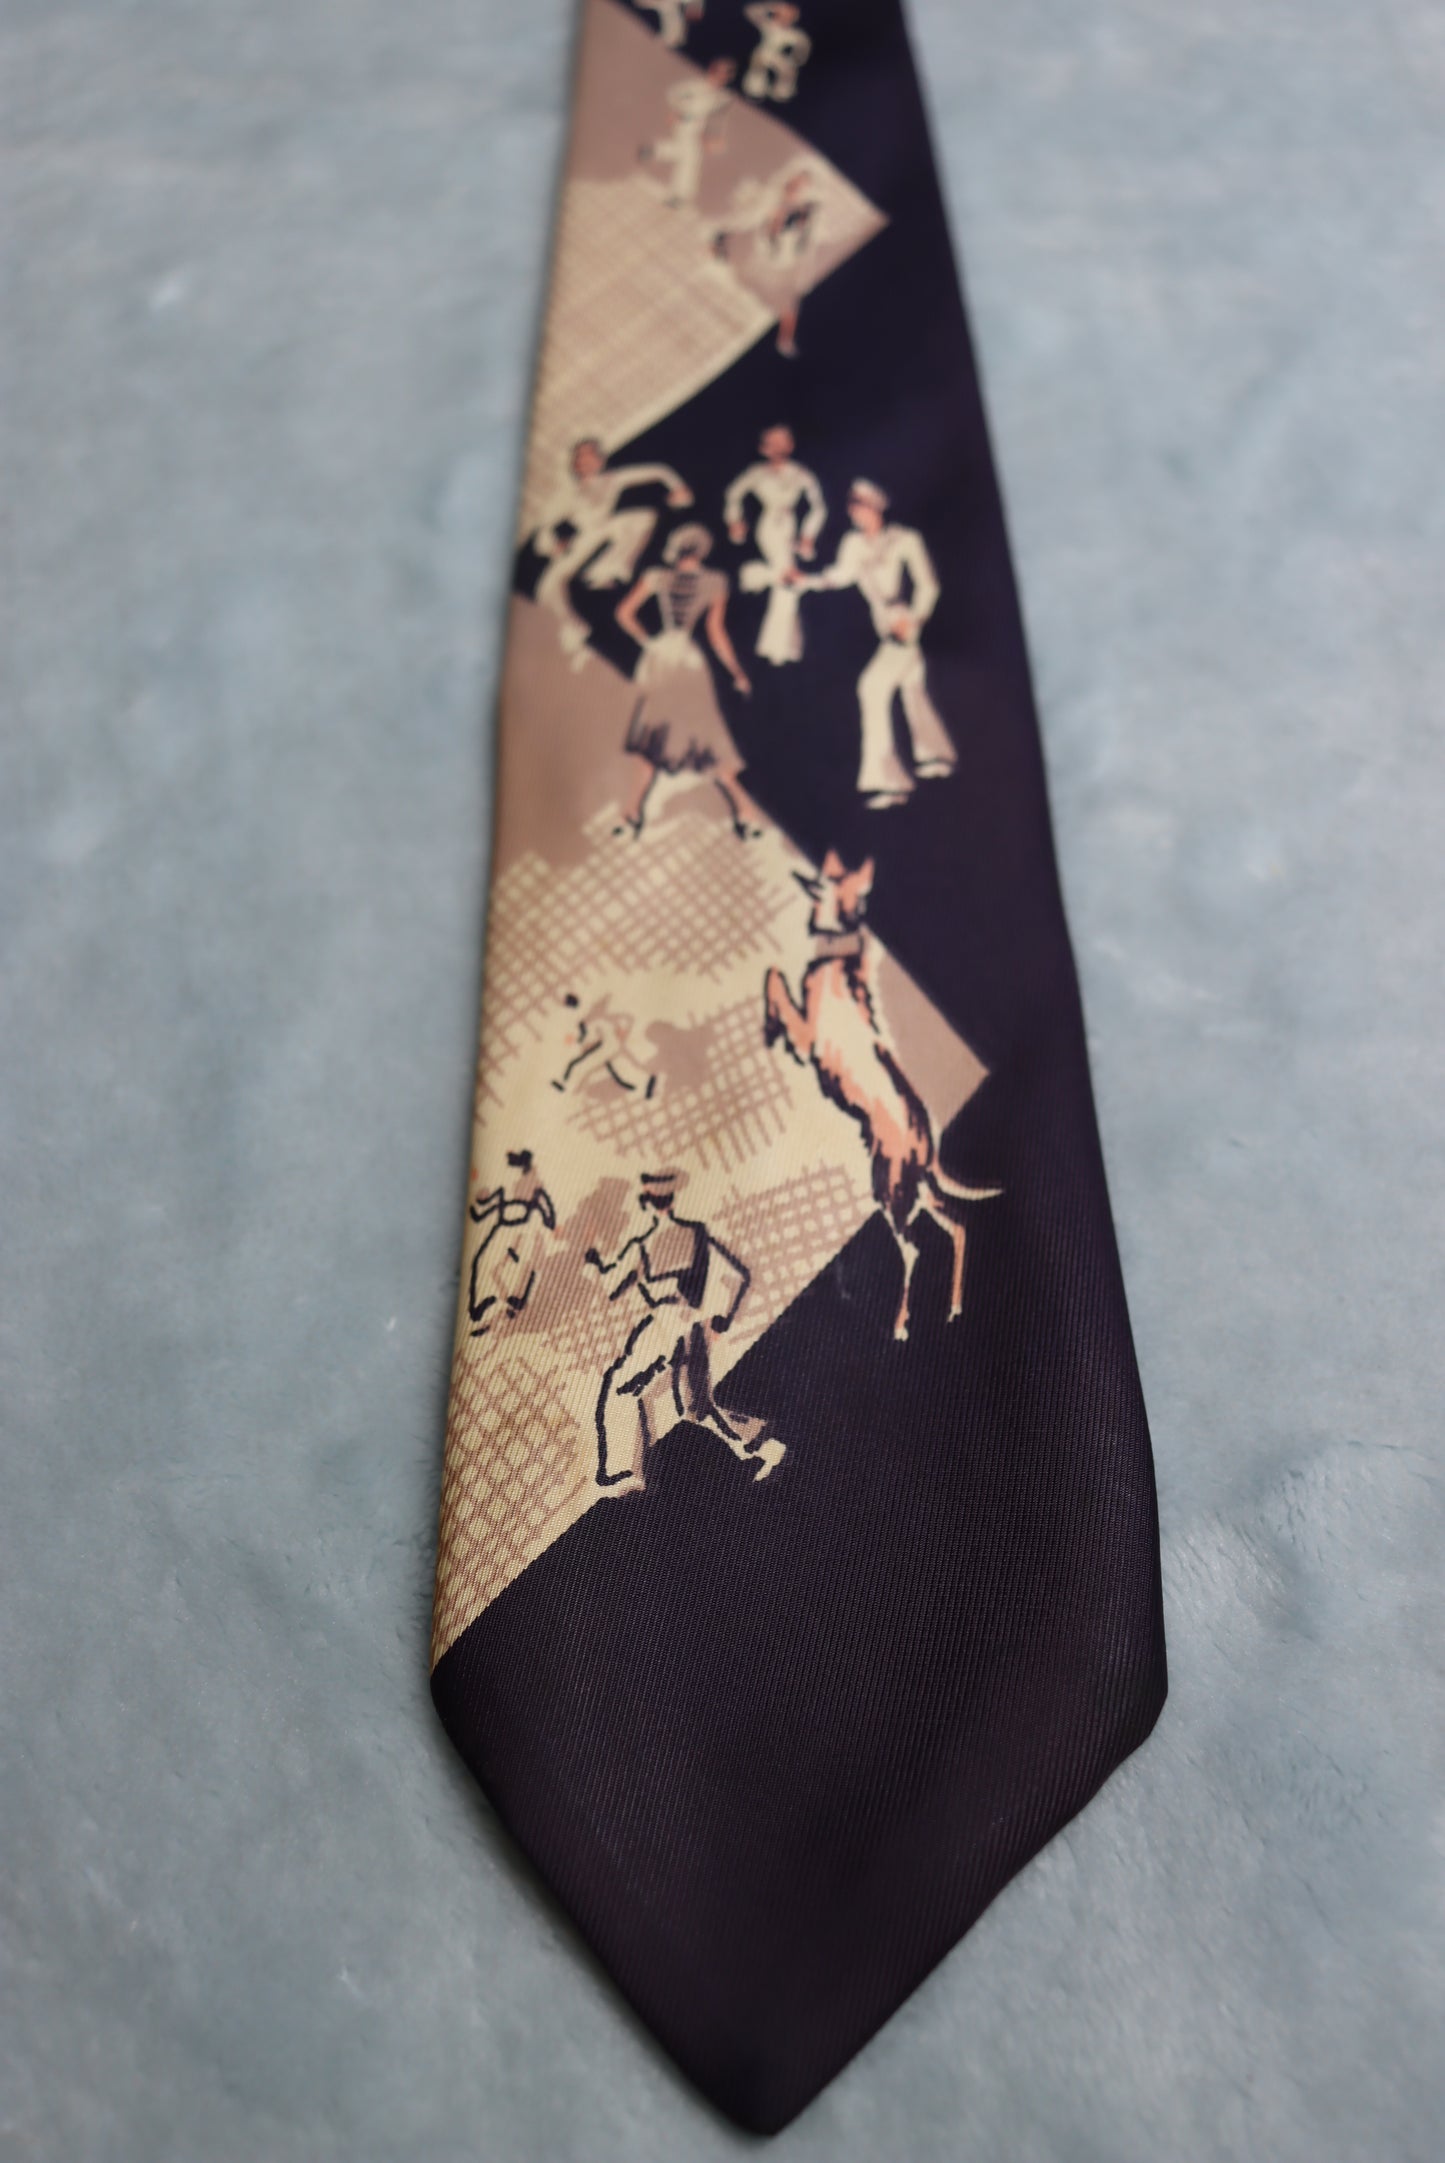 Vintage Navy Sailors Dancers and a Dog 1950s Tie